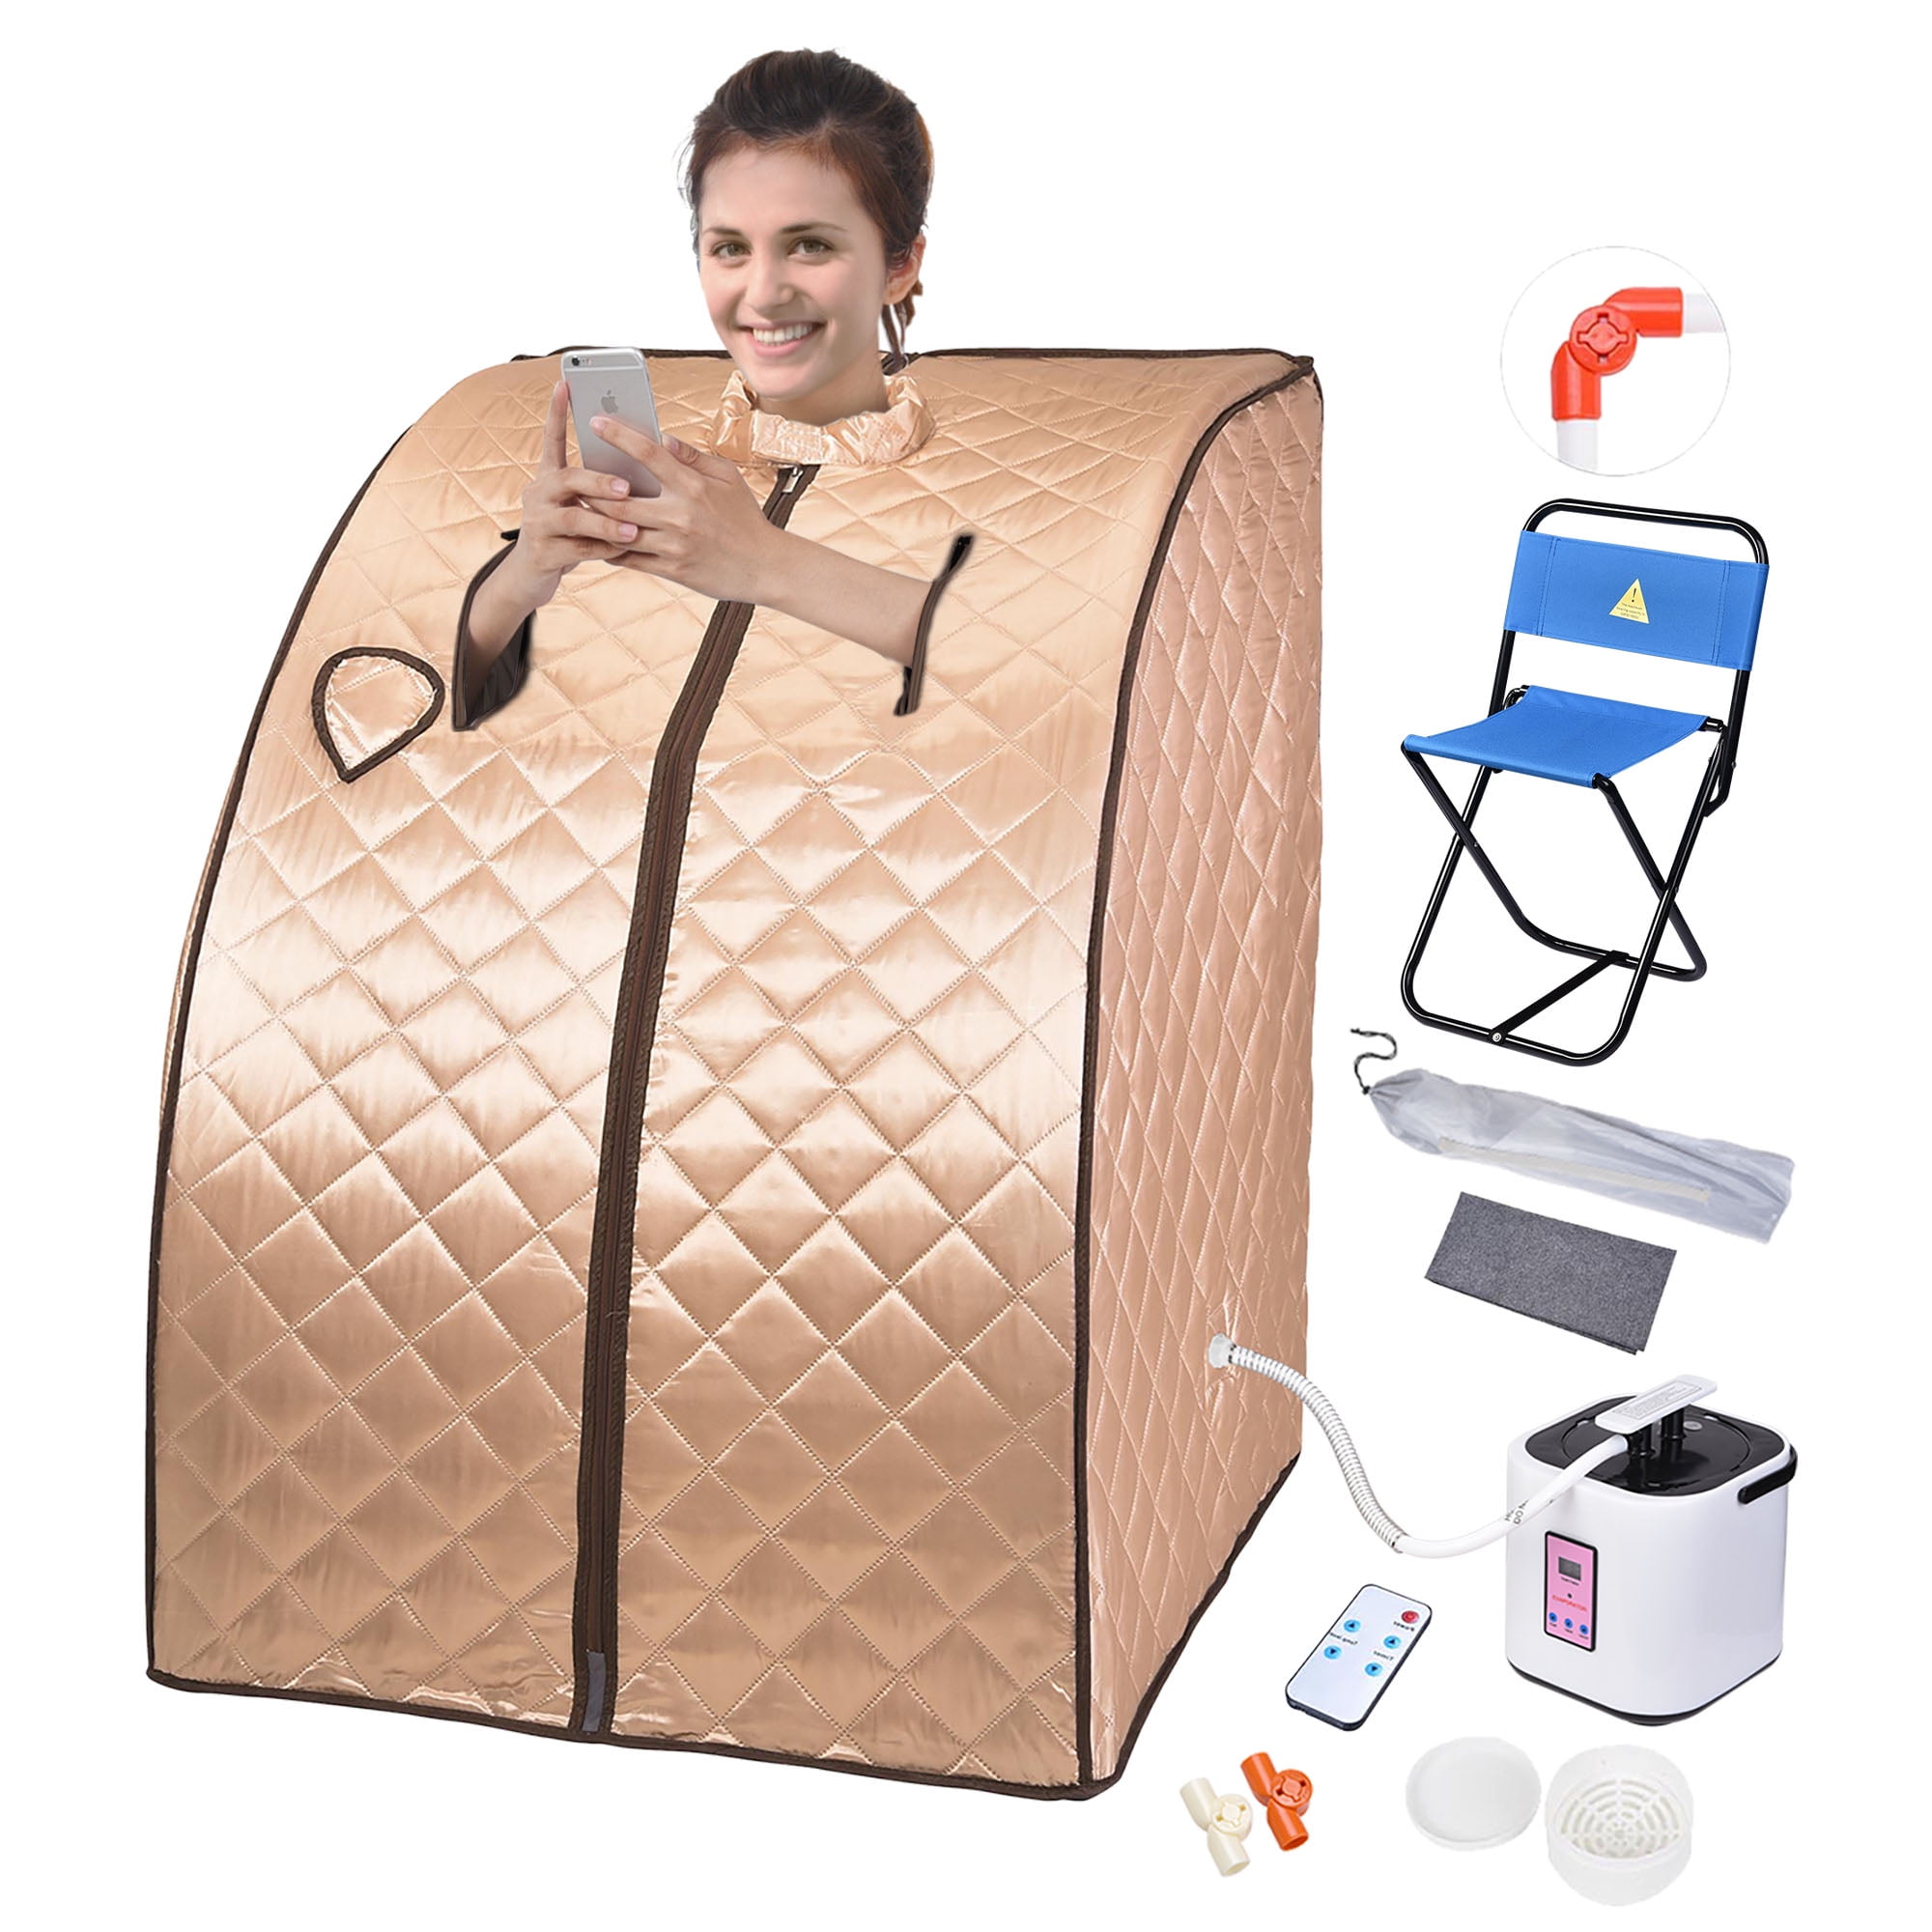 Jacksking Portable Steamer Sauna Sauna Pot Tent Set Sauna Therapeutic Machine Home Personal Spa Indoor Body Slimming Therapy for Relaxation 2L EU 220V 